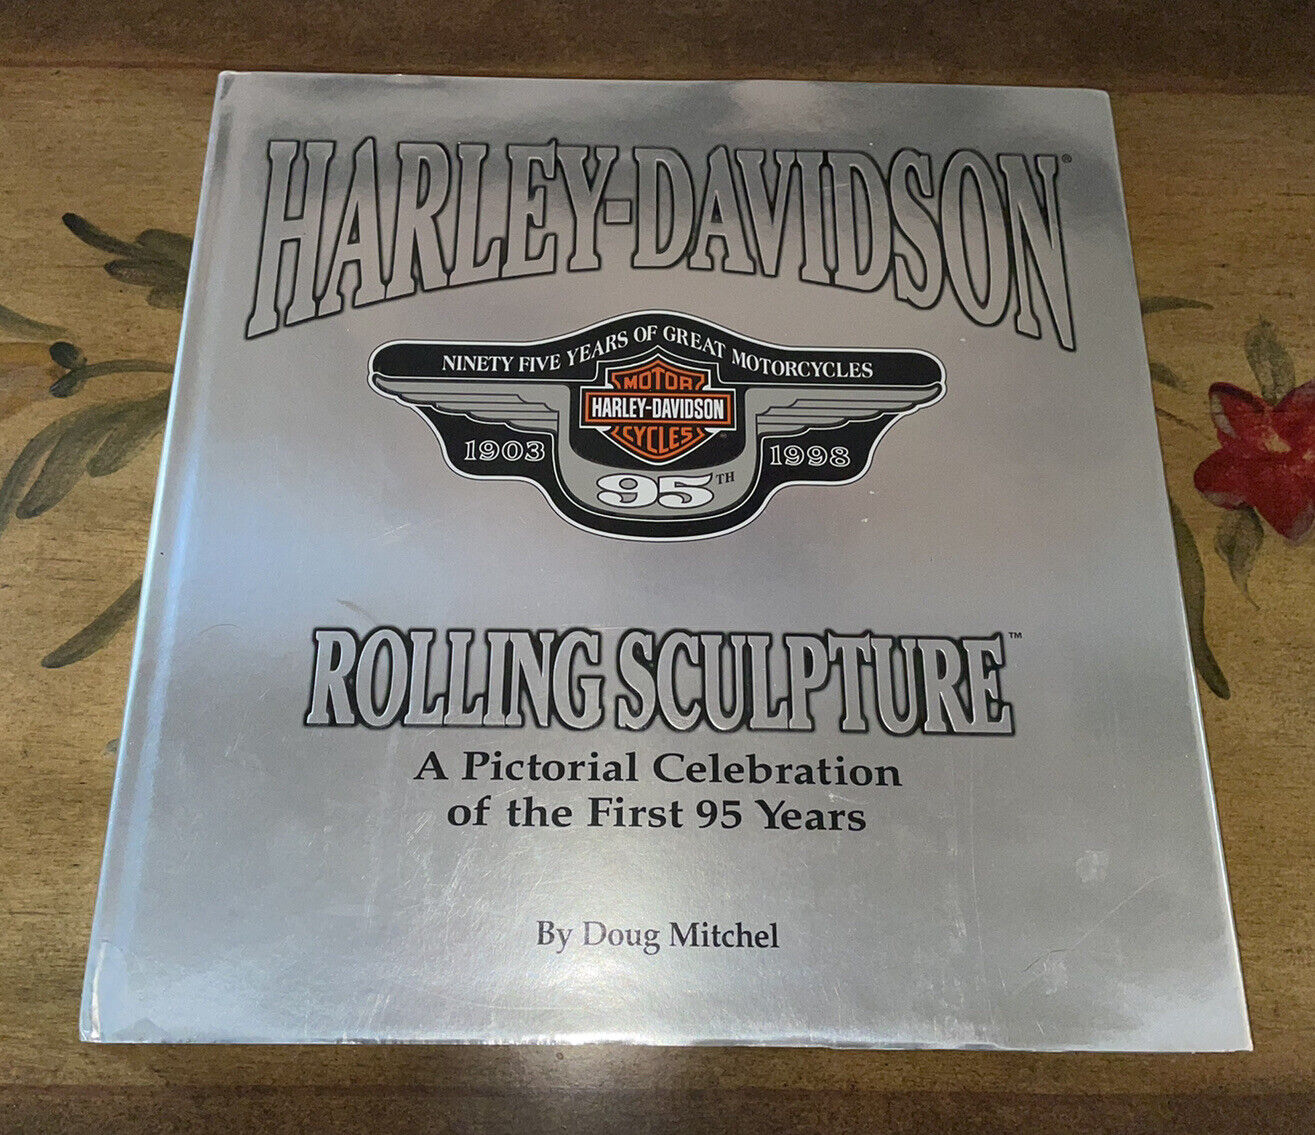 1998 Harley Davidson Motorcycle Book, Rolling Sculpture by Doug Mitchel